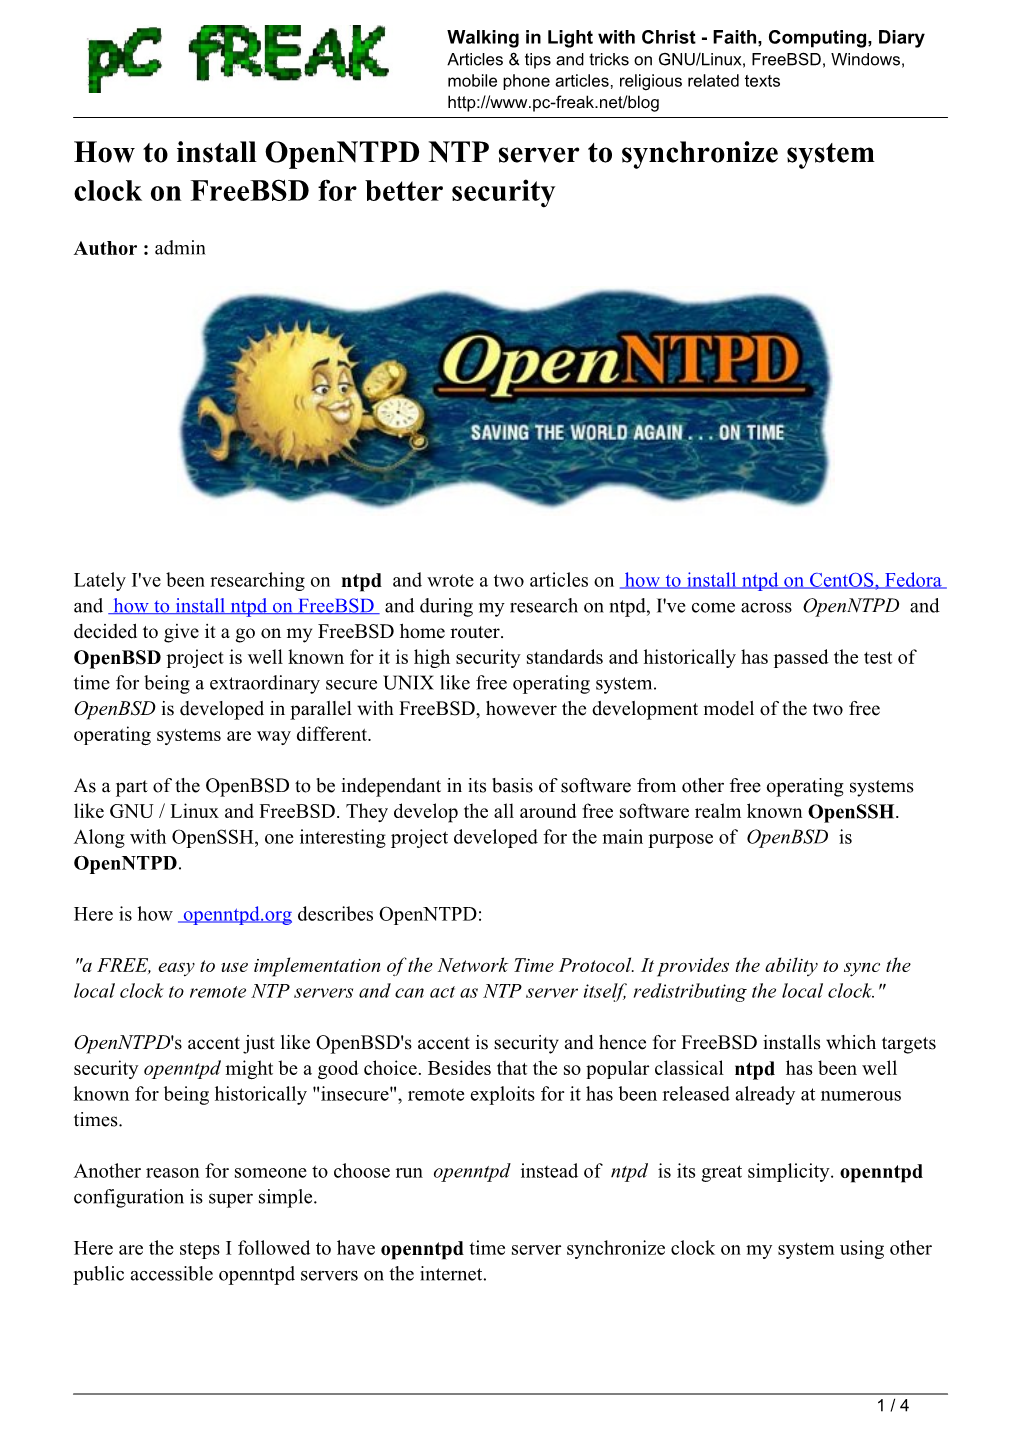 How to Install Openntpd NTP Server to Synchronize System Clock on Freebsd for Better Security